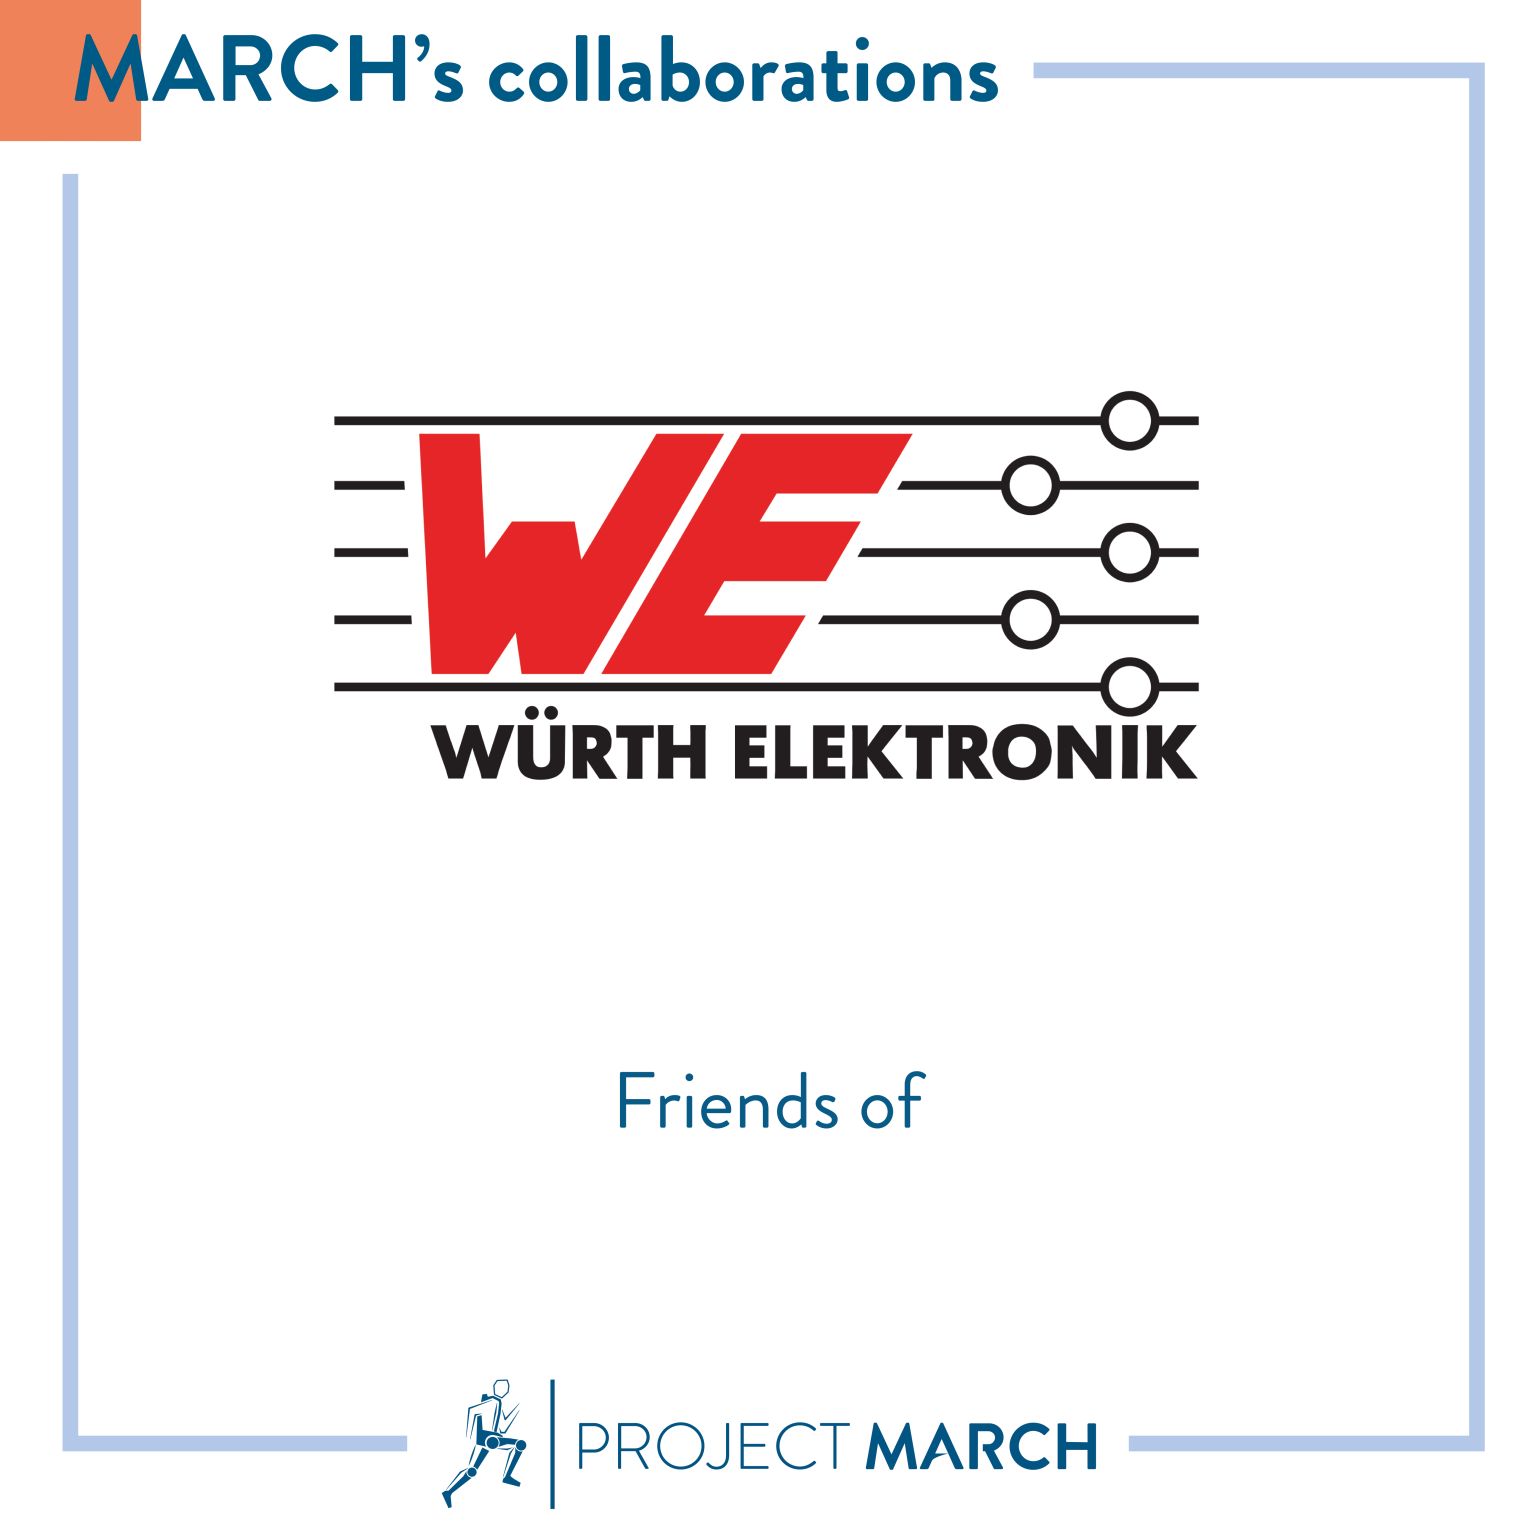 Wurth Elektronik is friends with Project MARCH to build exoskeletons